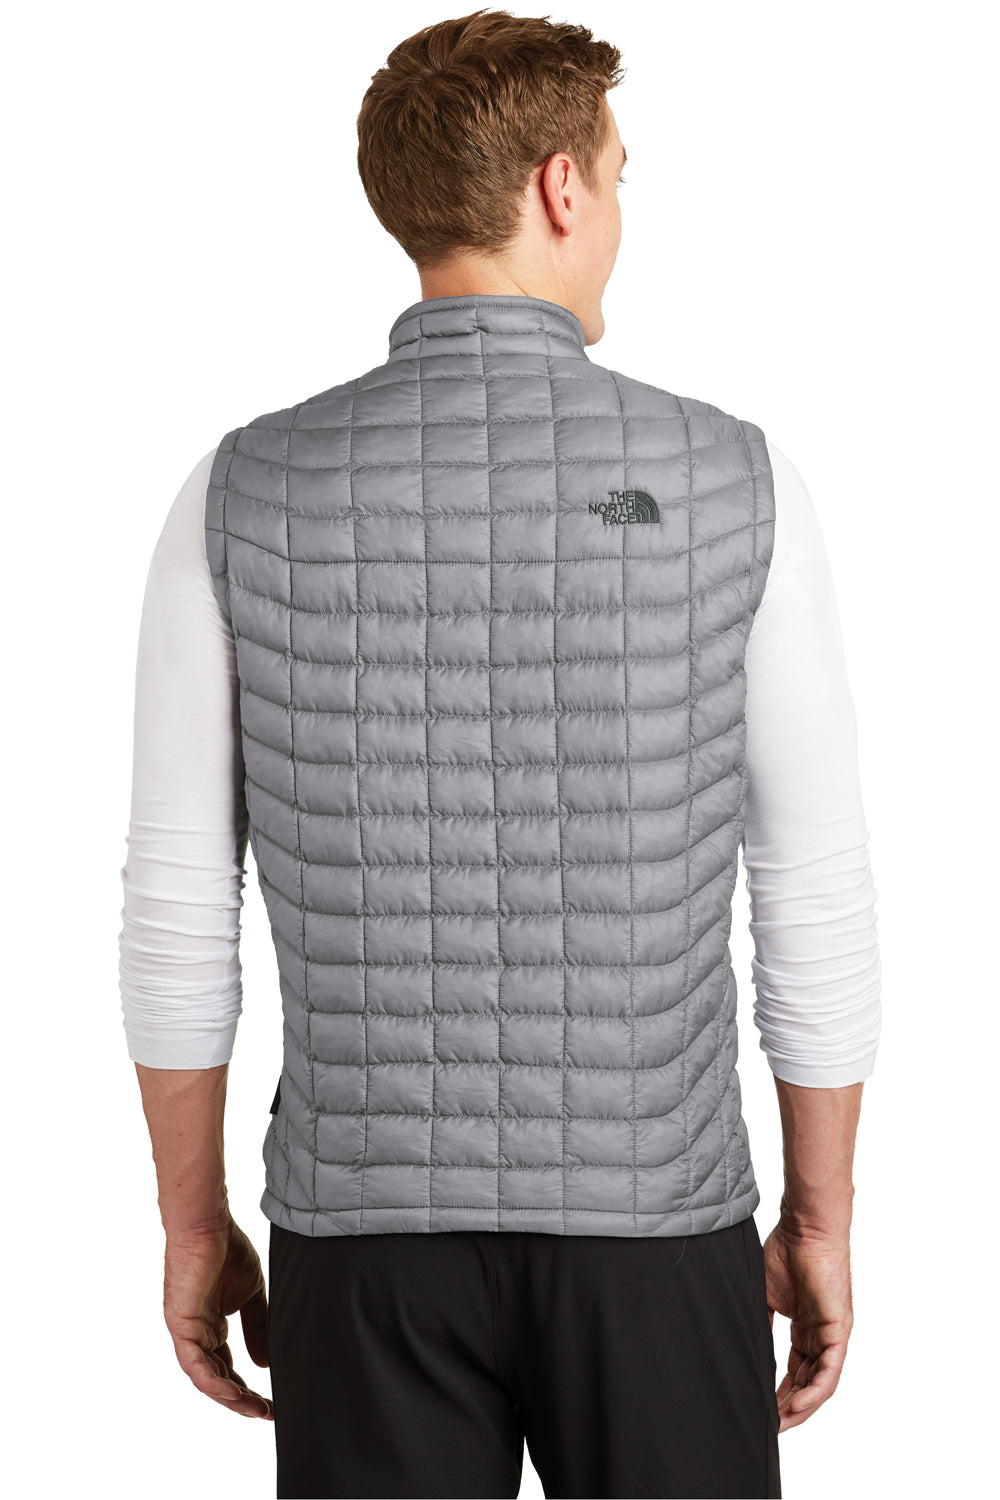 The North Face NF0A3LHD Mens ThermoBall Trekker Water Resistant Full Zip Vest Mid Grey Back